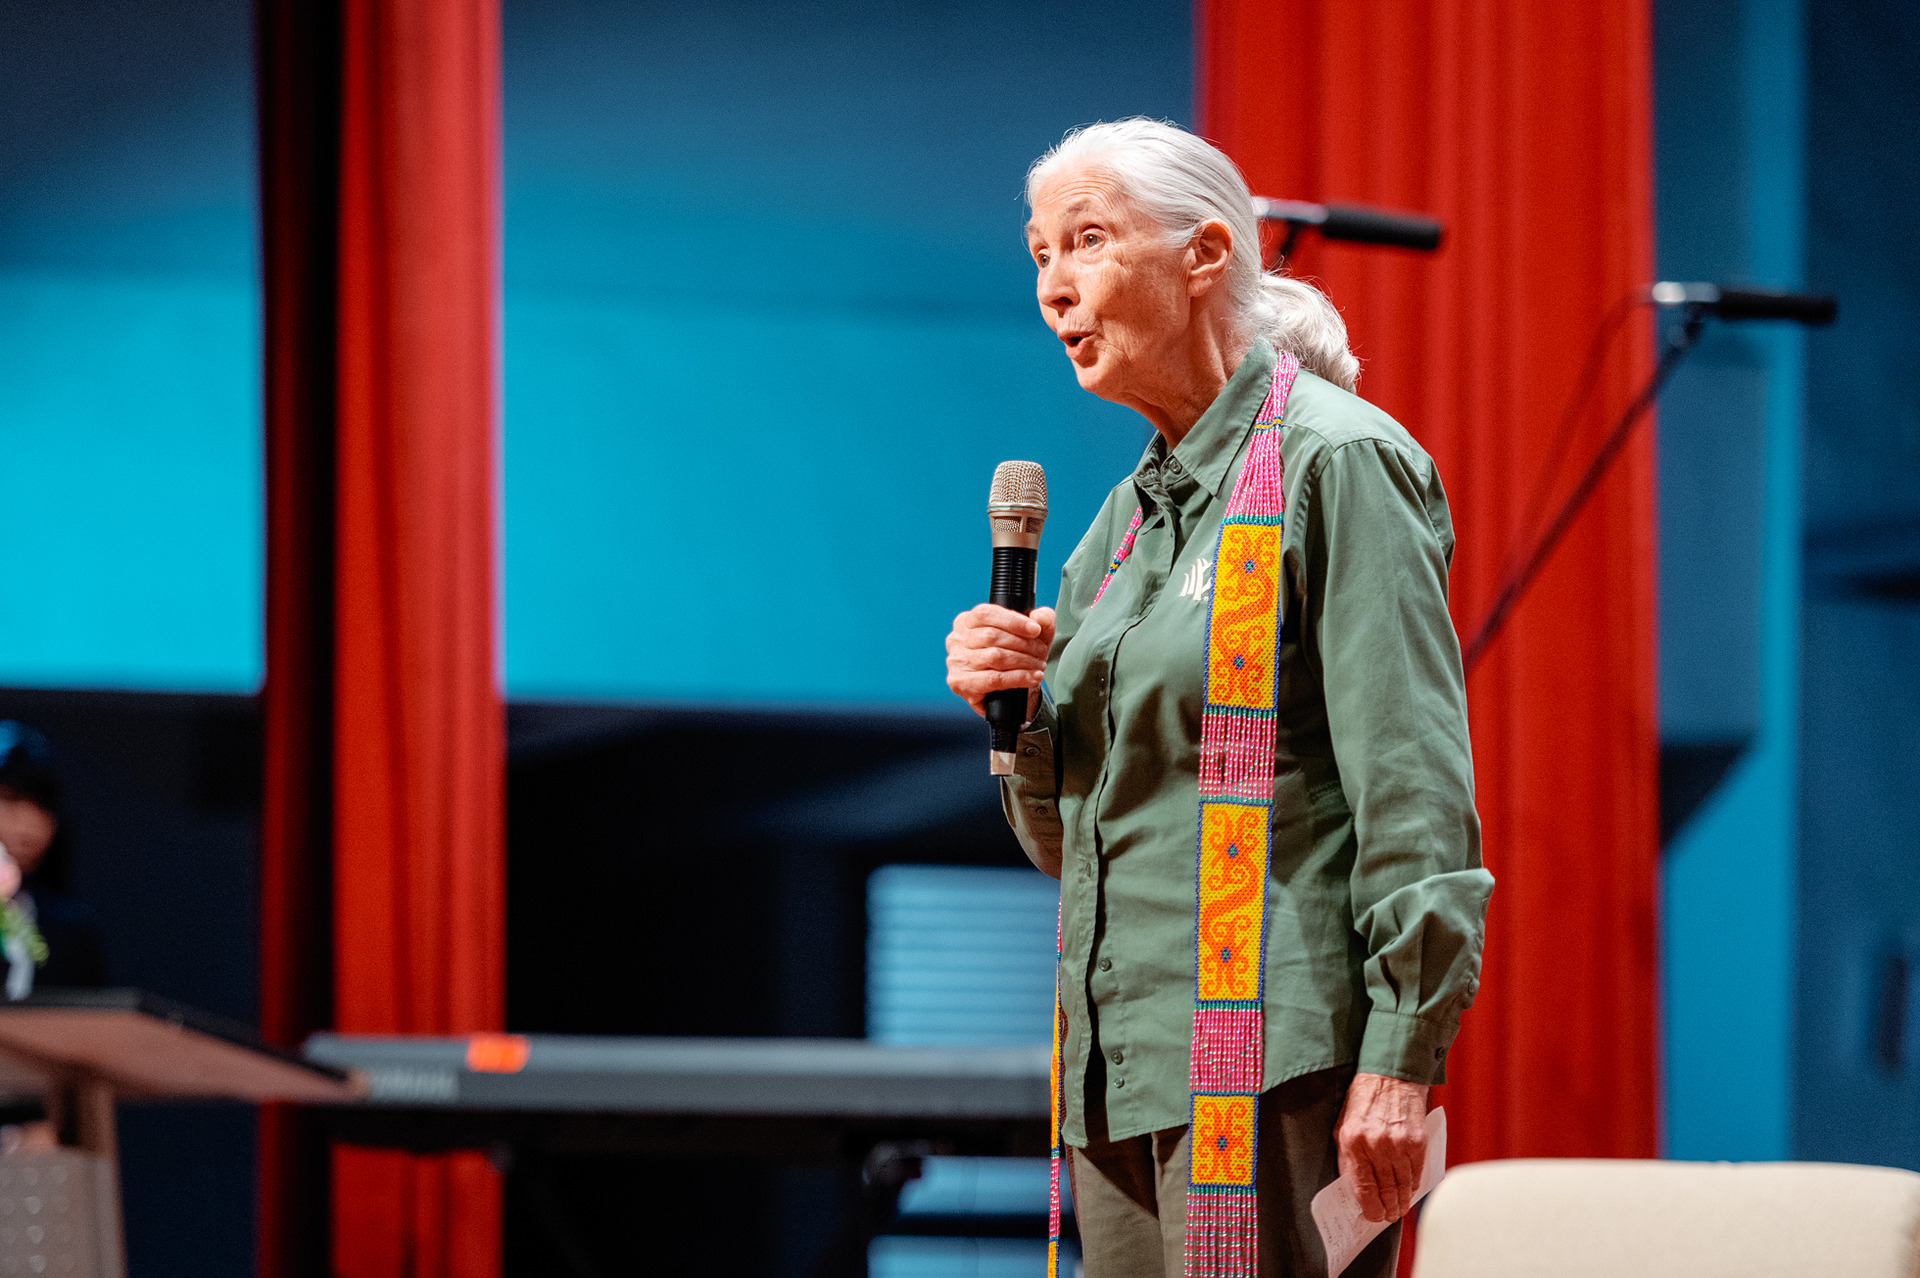 Dr. Jane Goodall wished young people keep a warm heart